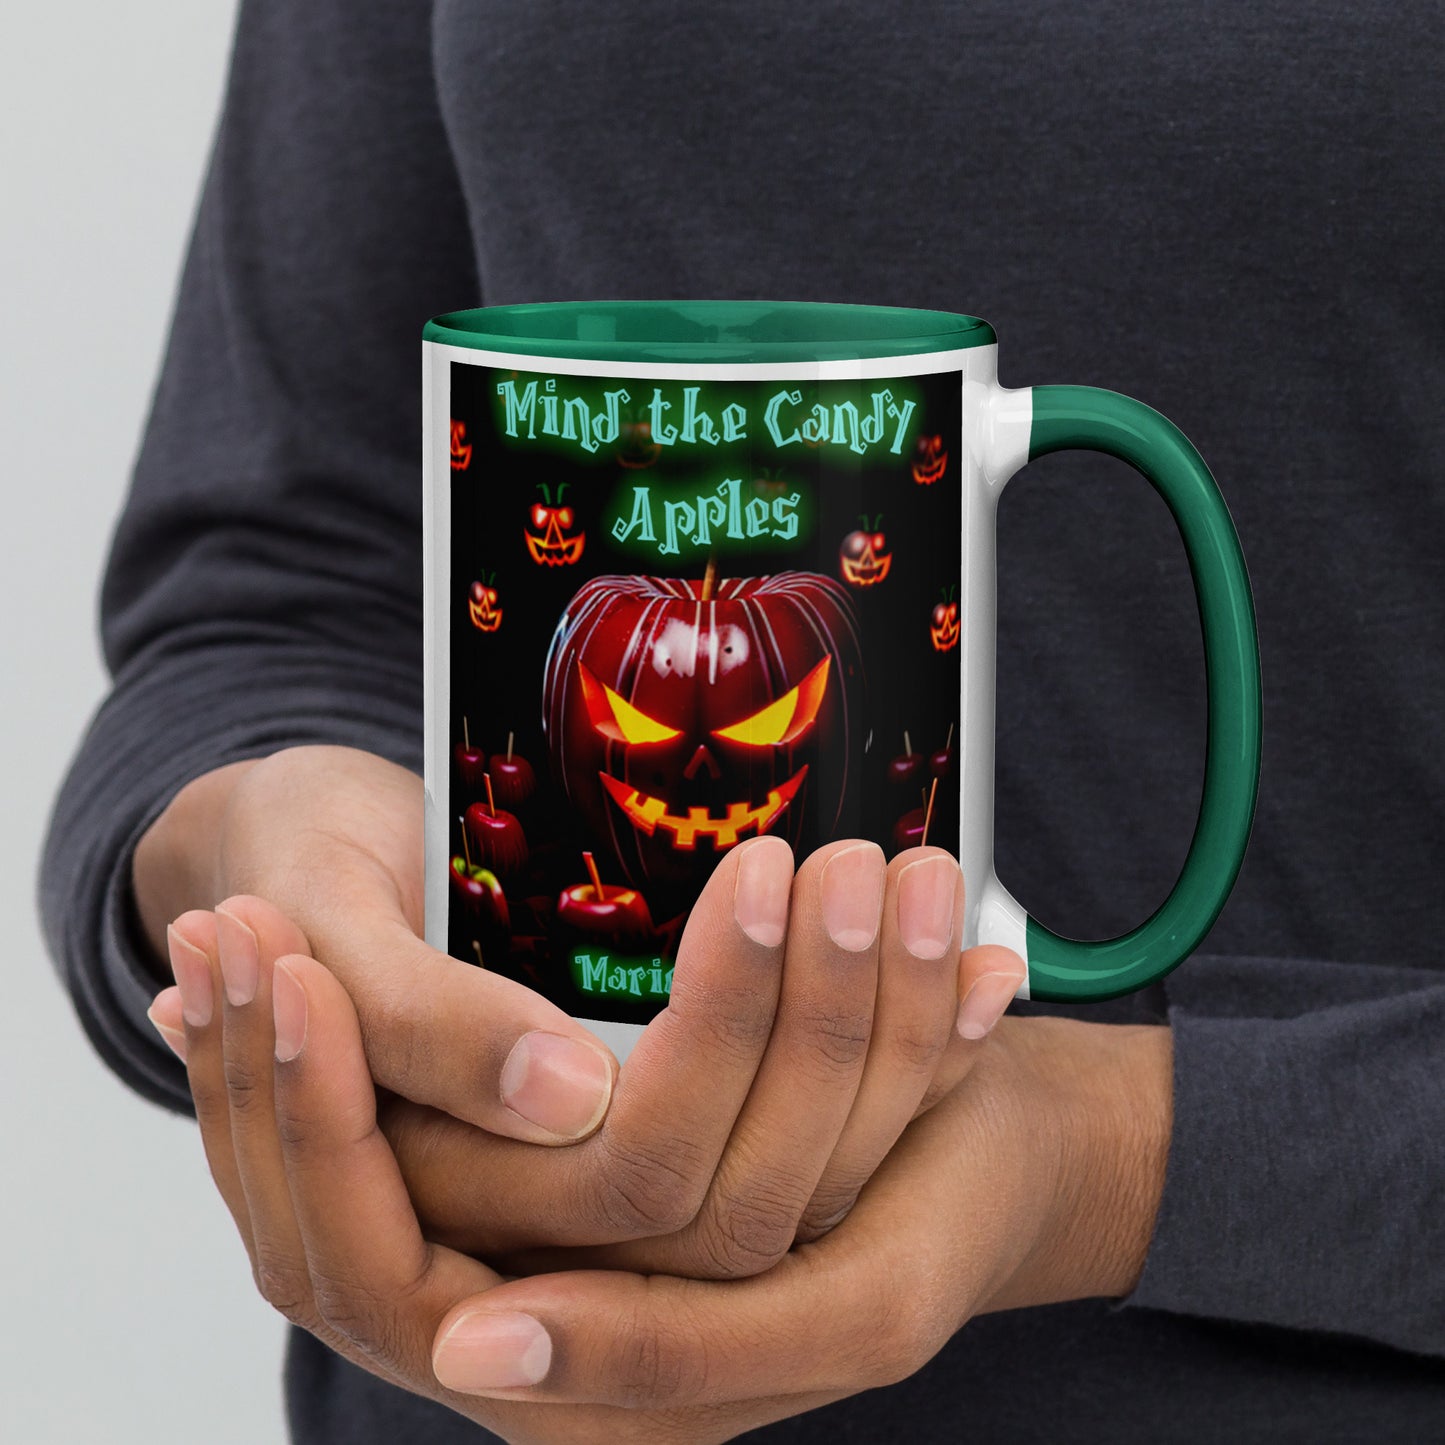 Mario Marino - Mind The Candy Apples Mug With Color Inside